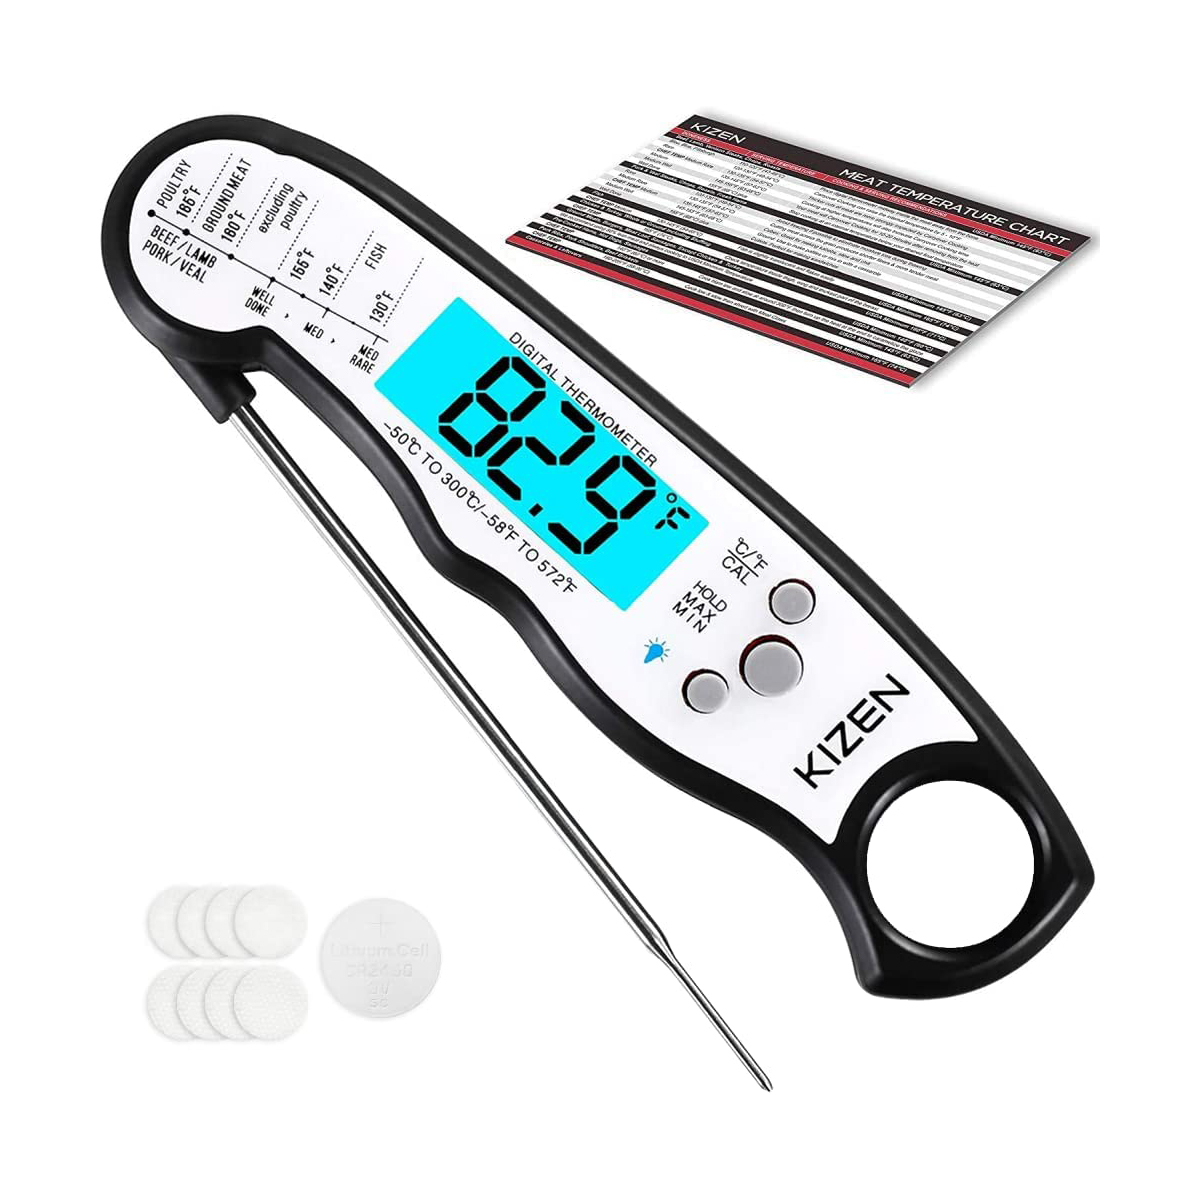 A top-rated meat thermometer for $12 is the very definition of a